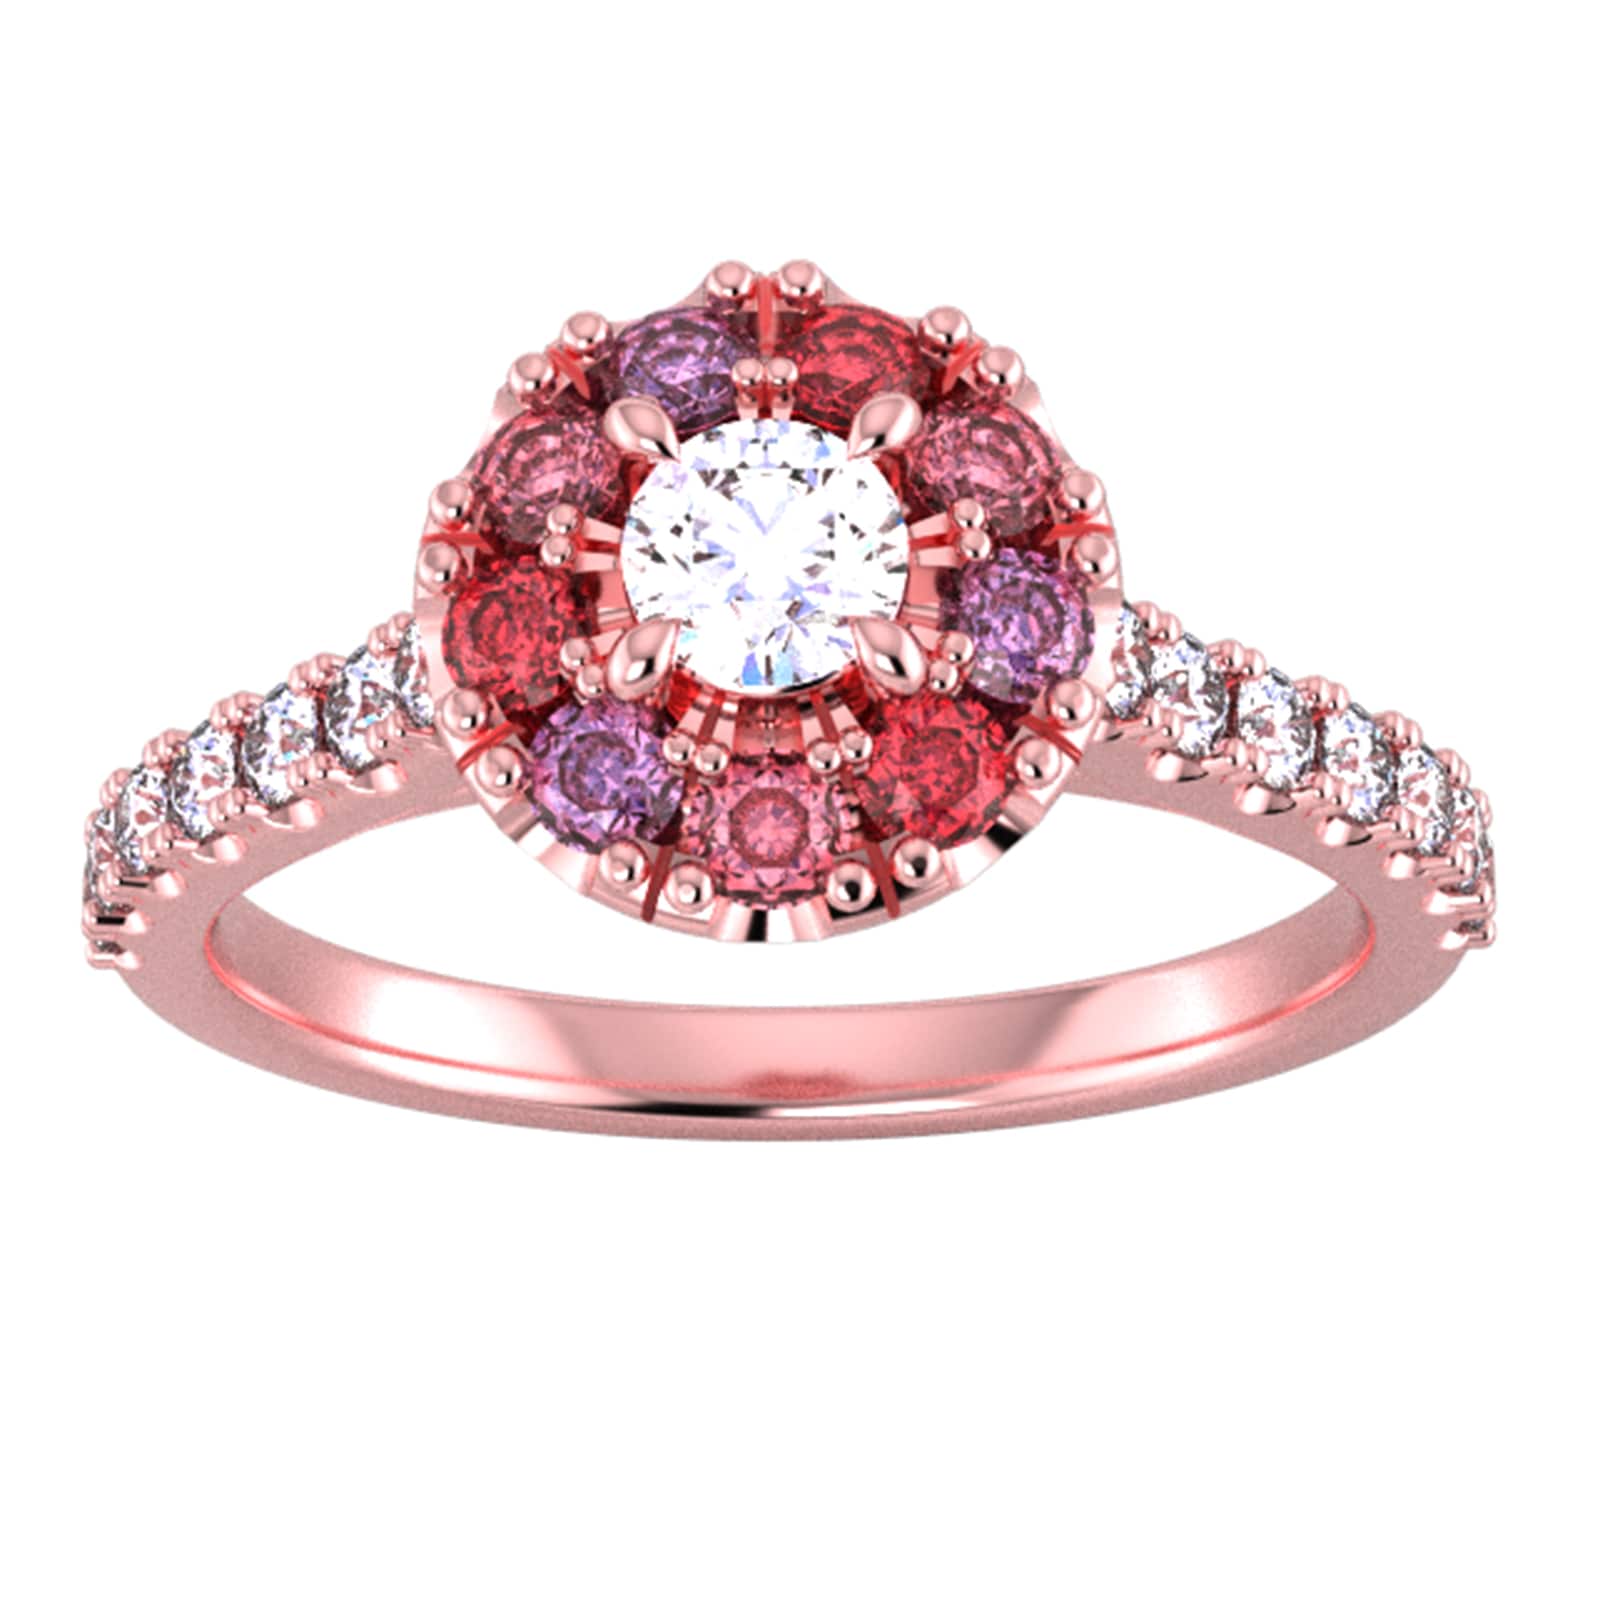 18ct Rose Gold Diamond & Red, Pink, Purple Sapphire Halo Ring - Ring Size C